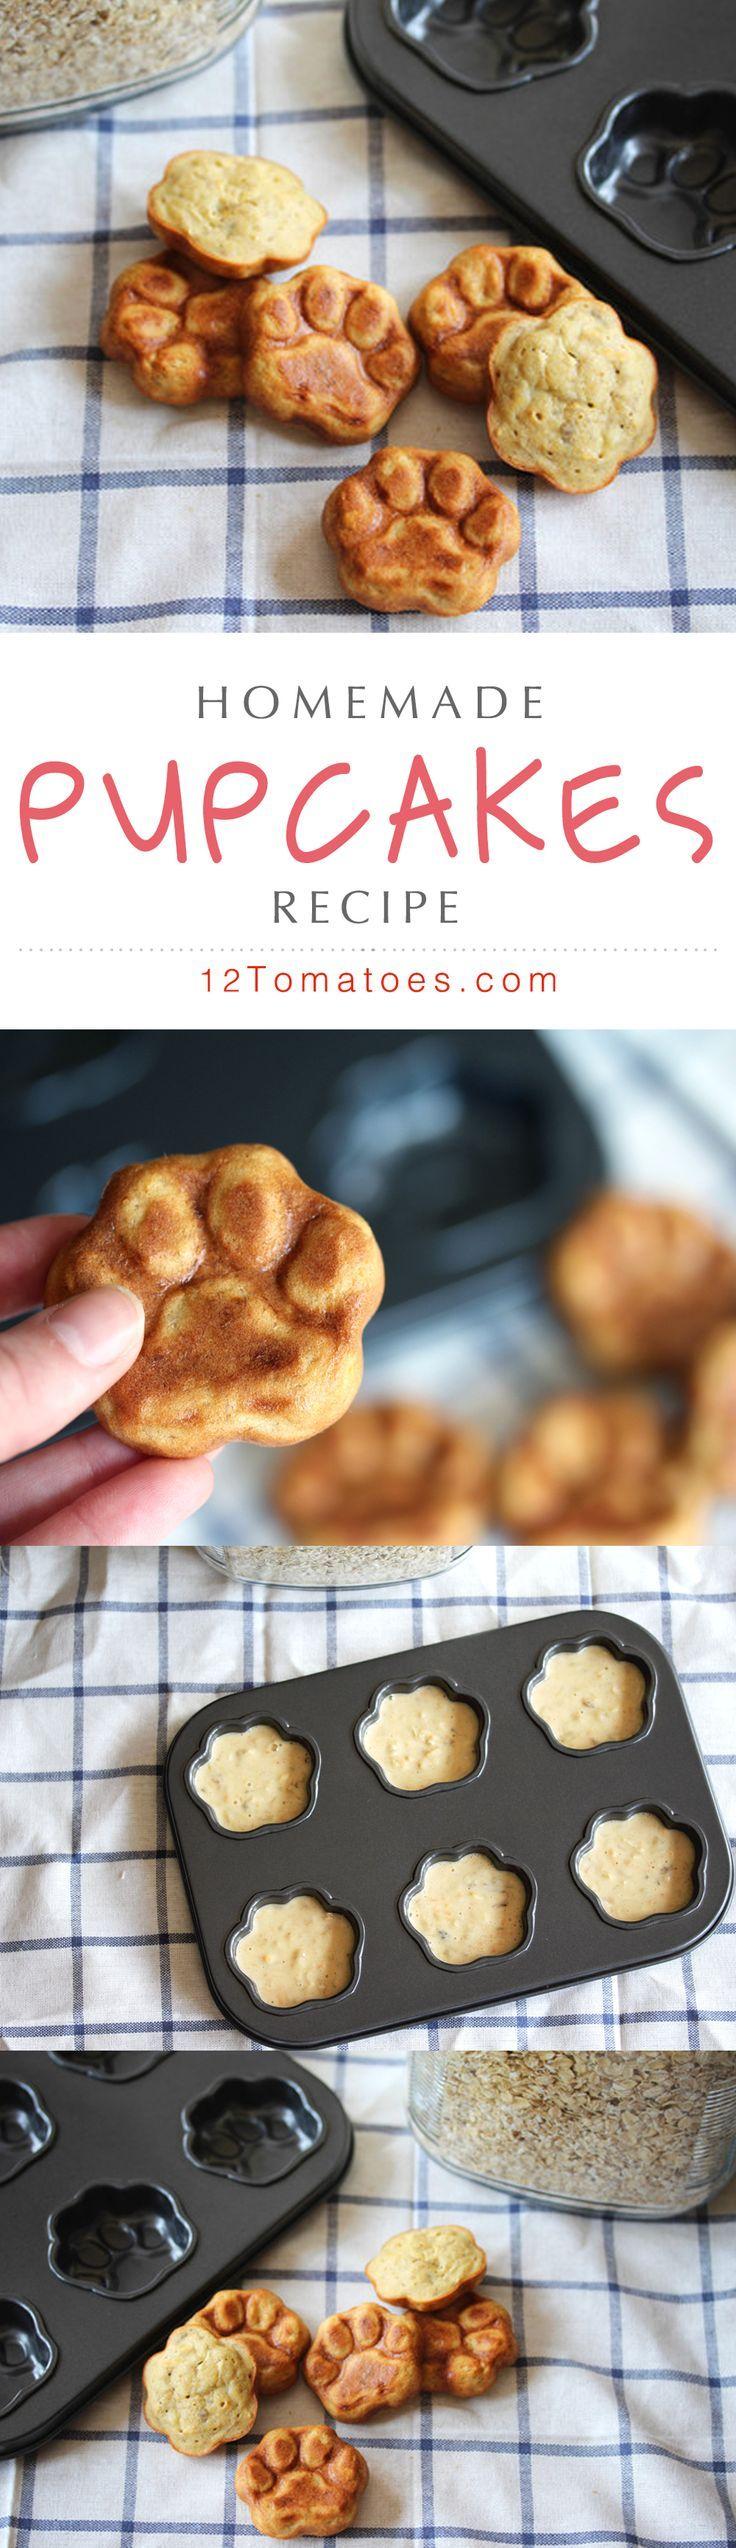 Mariage - Give Your Pups Some Lovin’ With These Tasty Homemade Pupcakes!